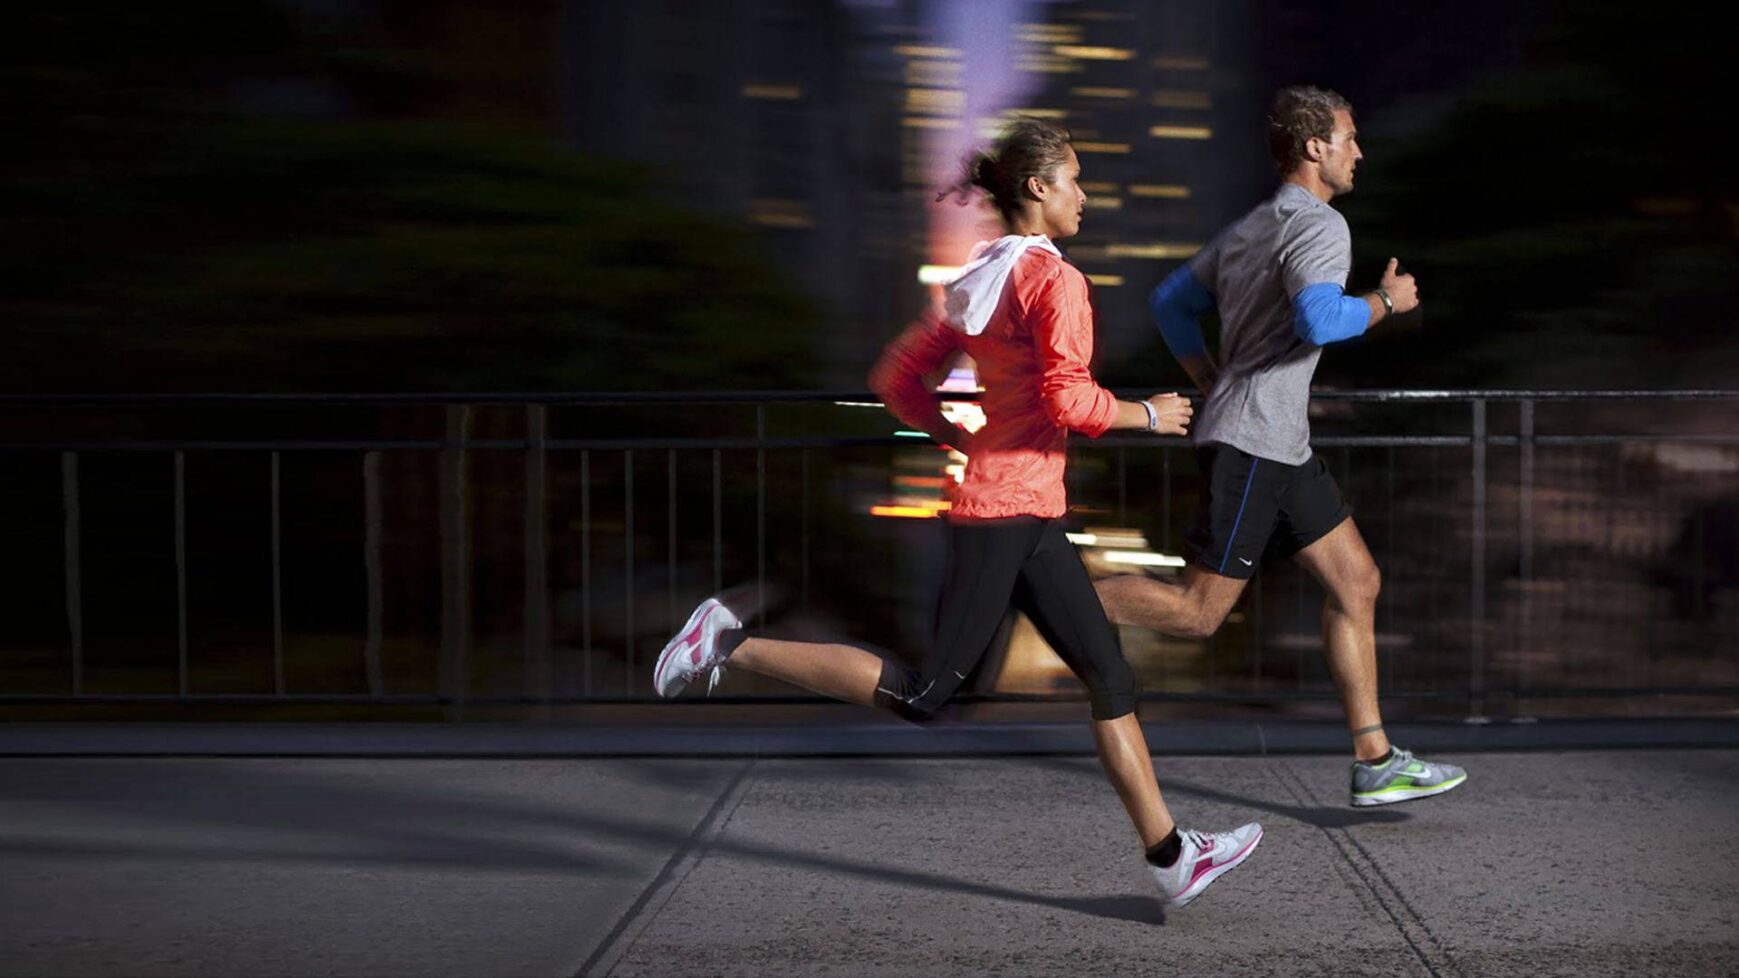 People jogging with a blurred background